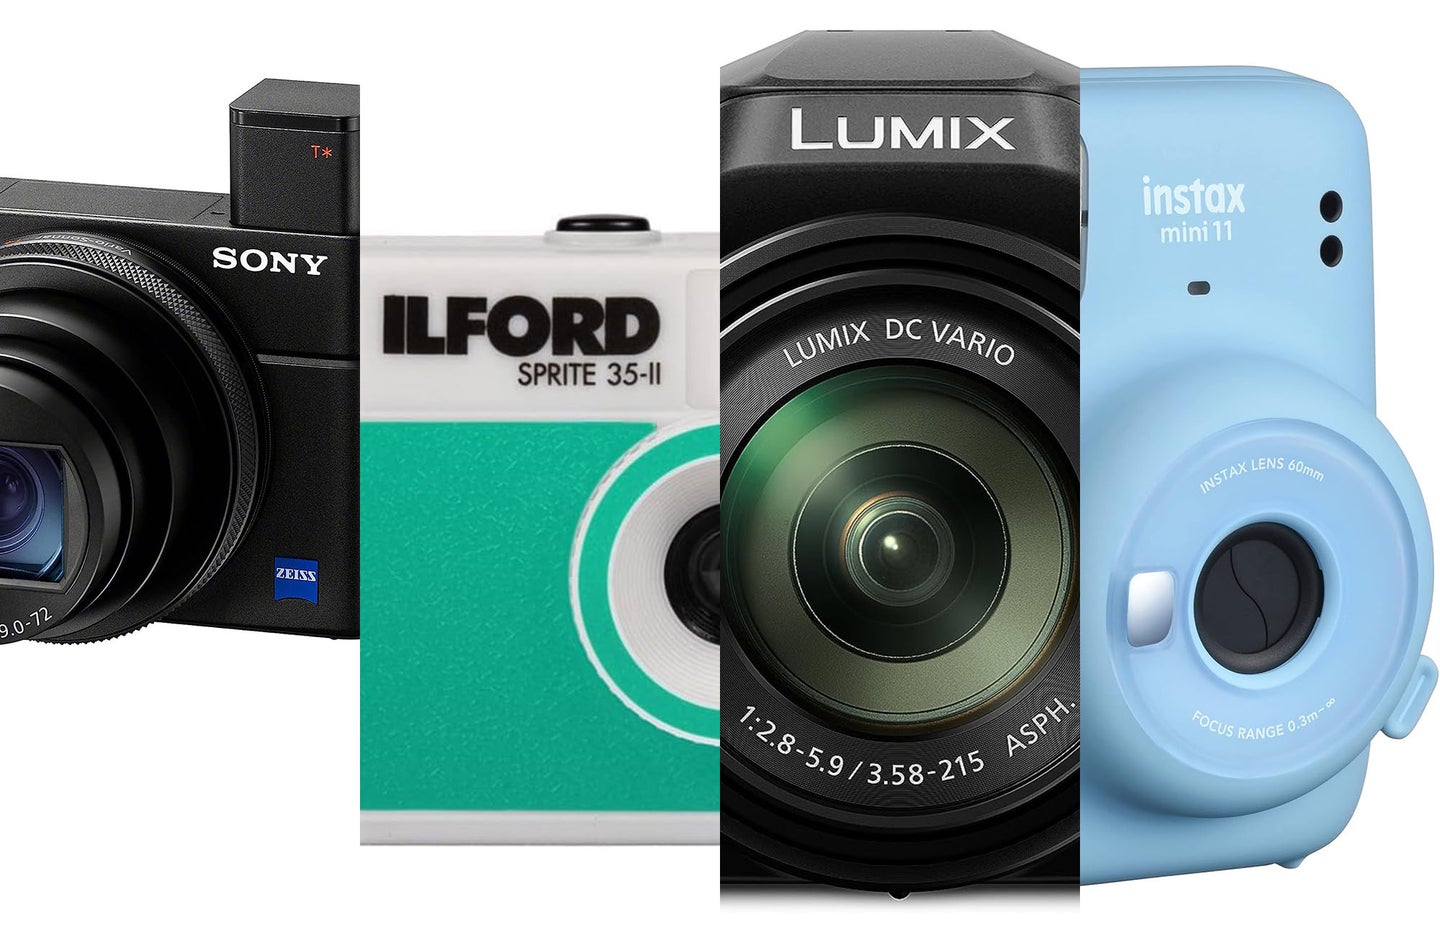 Four examples of the best point-and-shoot cameras on a white background